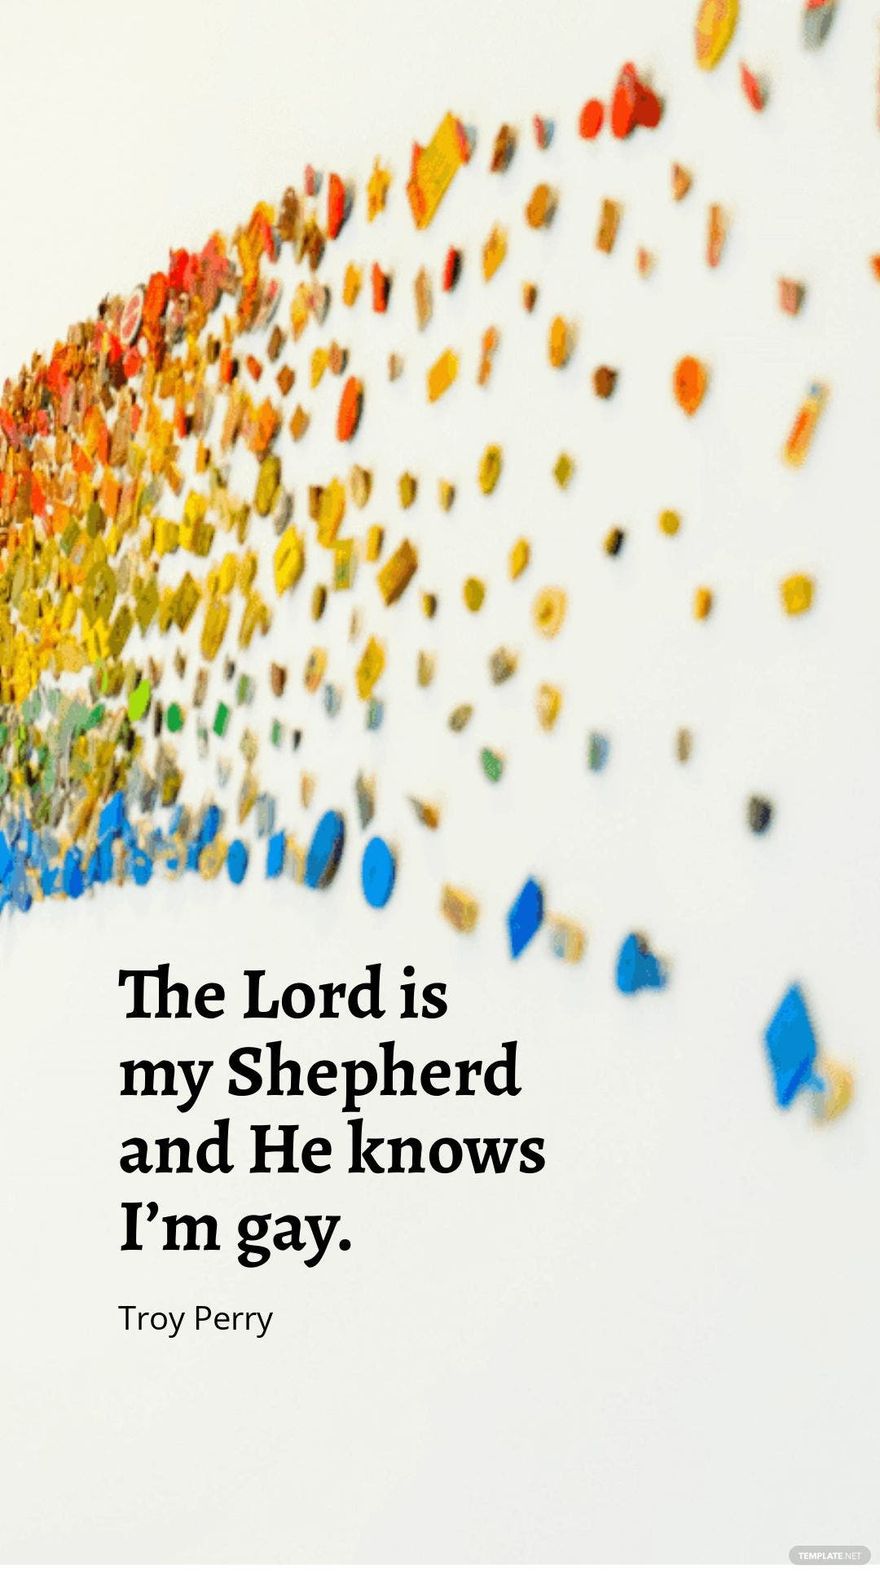 Troy Perry - The Lord is my Shepherd and He knows I’m gay. in JPG